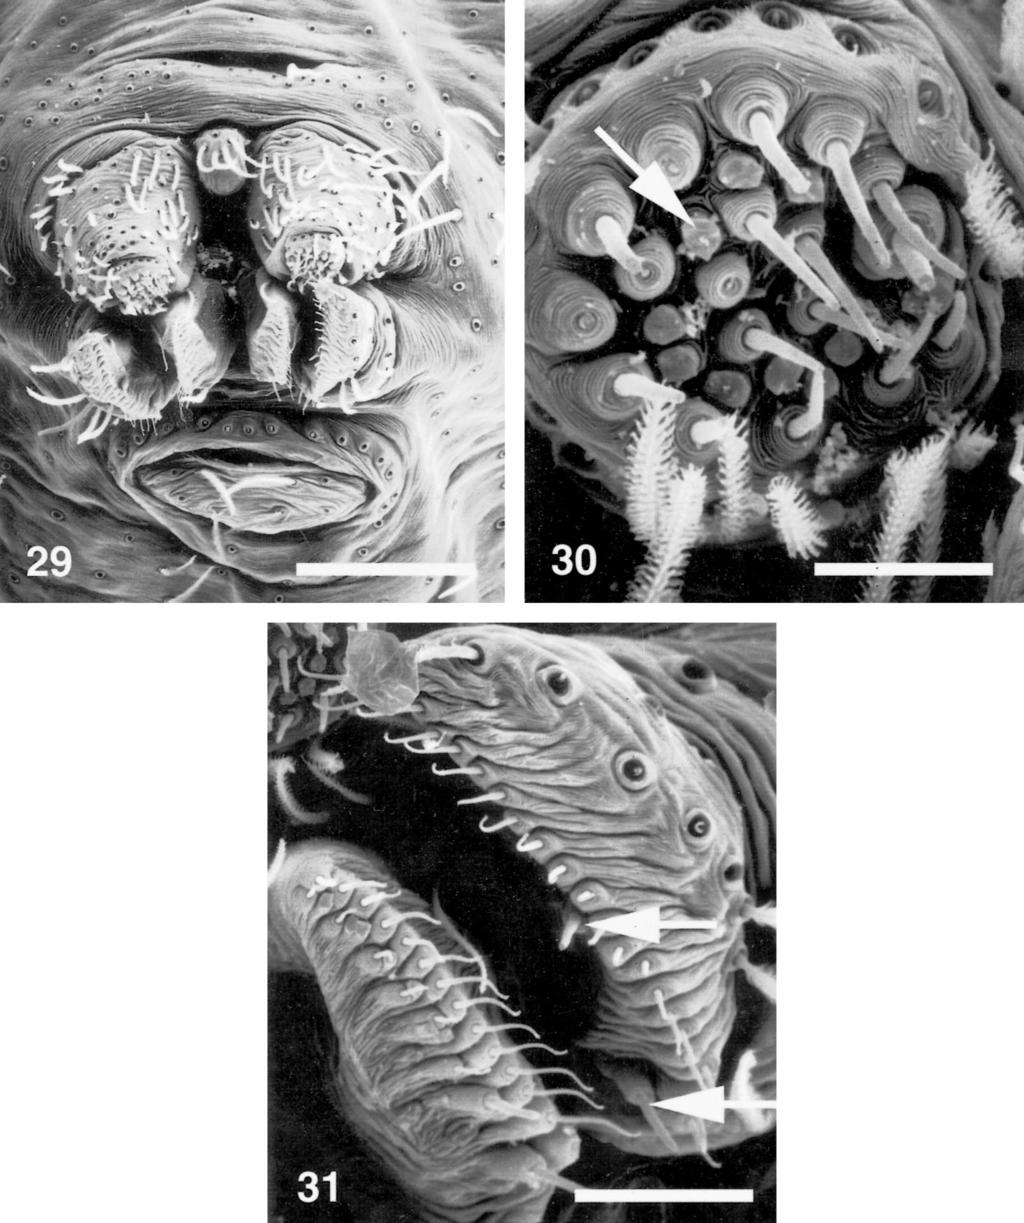 248 THE JOURNAL OF ARACHNOLOGY Figures 29 31. Calileptoneta sp., female from Mt. Diablo, spinning organs. 29. Ventral. 30. Left ALS, arrow to tartipore. 31. Left PLS, PMS, arrows to cylindrical gland spigots.